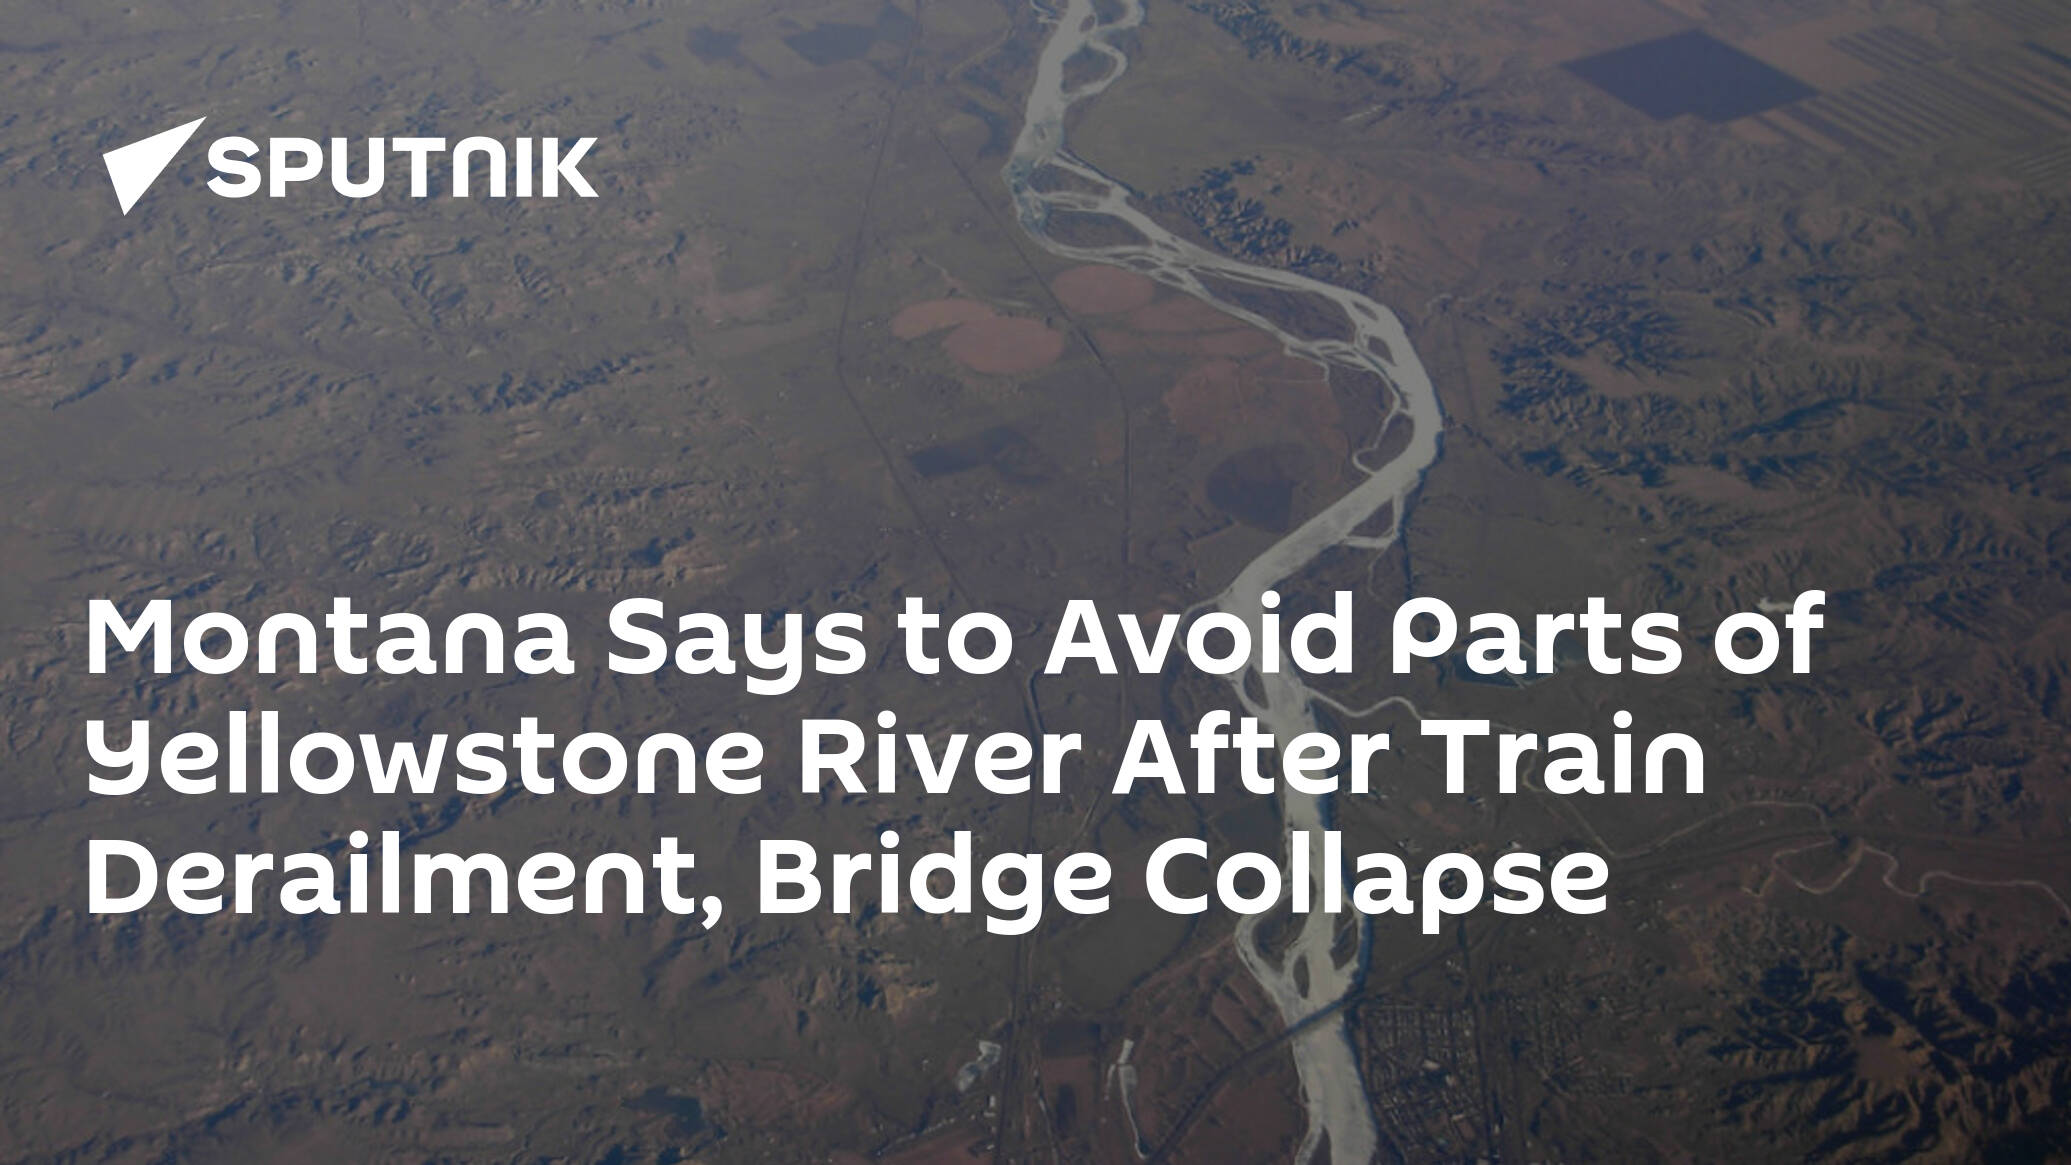 Montana Says to Avoid Parts of Yellowstone River After Train Derailment, Bridge Collapse